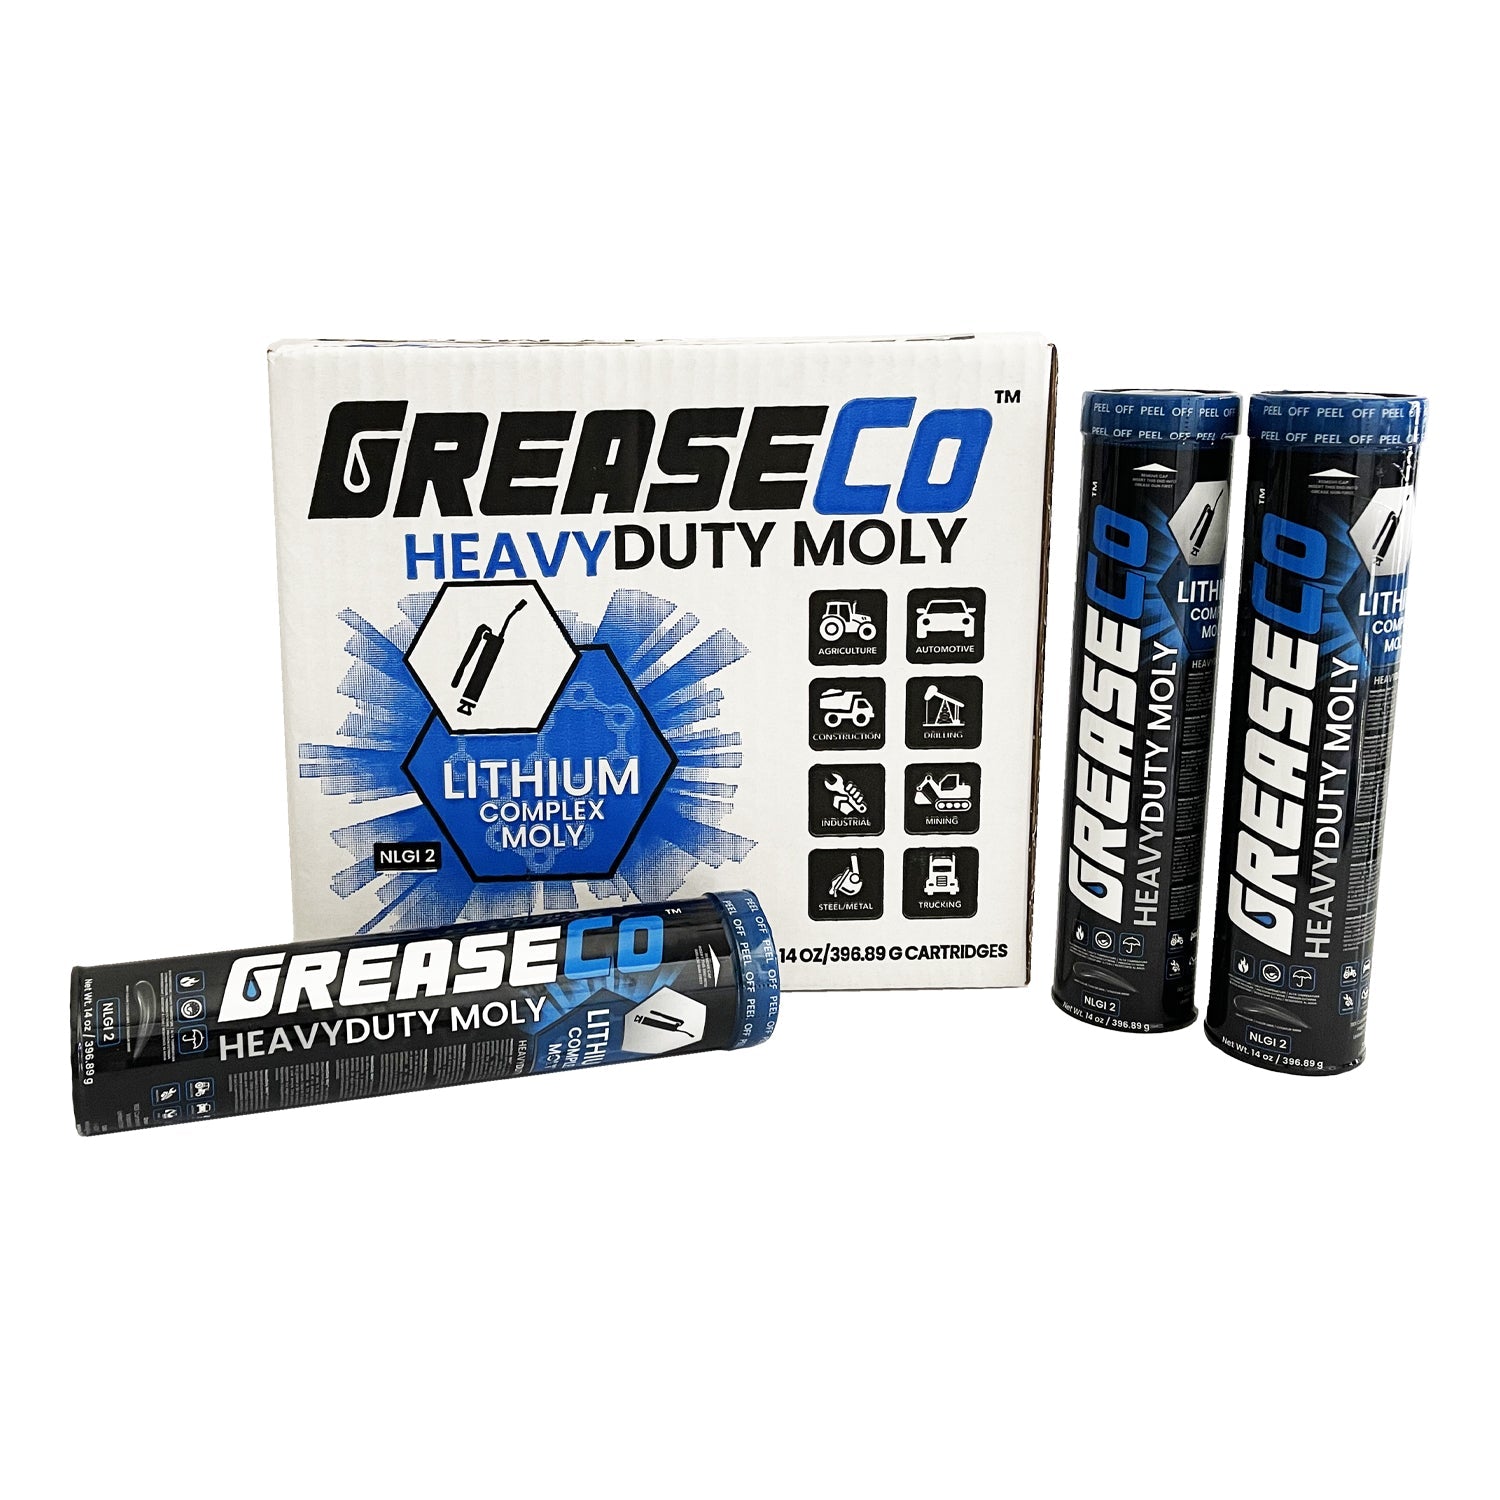 Lithium Complex Moly High Temp High Performance Grease Tube 10 Pack of Cartridge Refills from GreaseCo HeavyDuty Moly